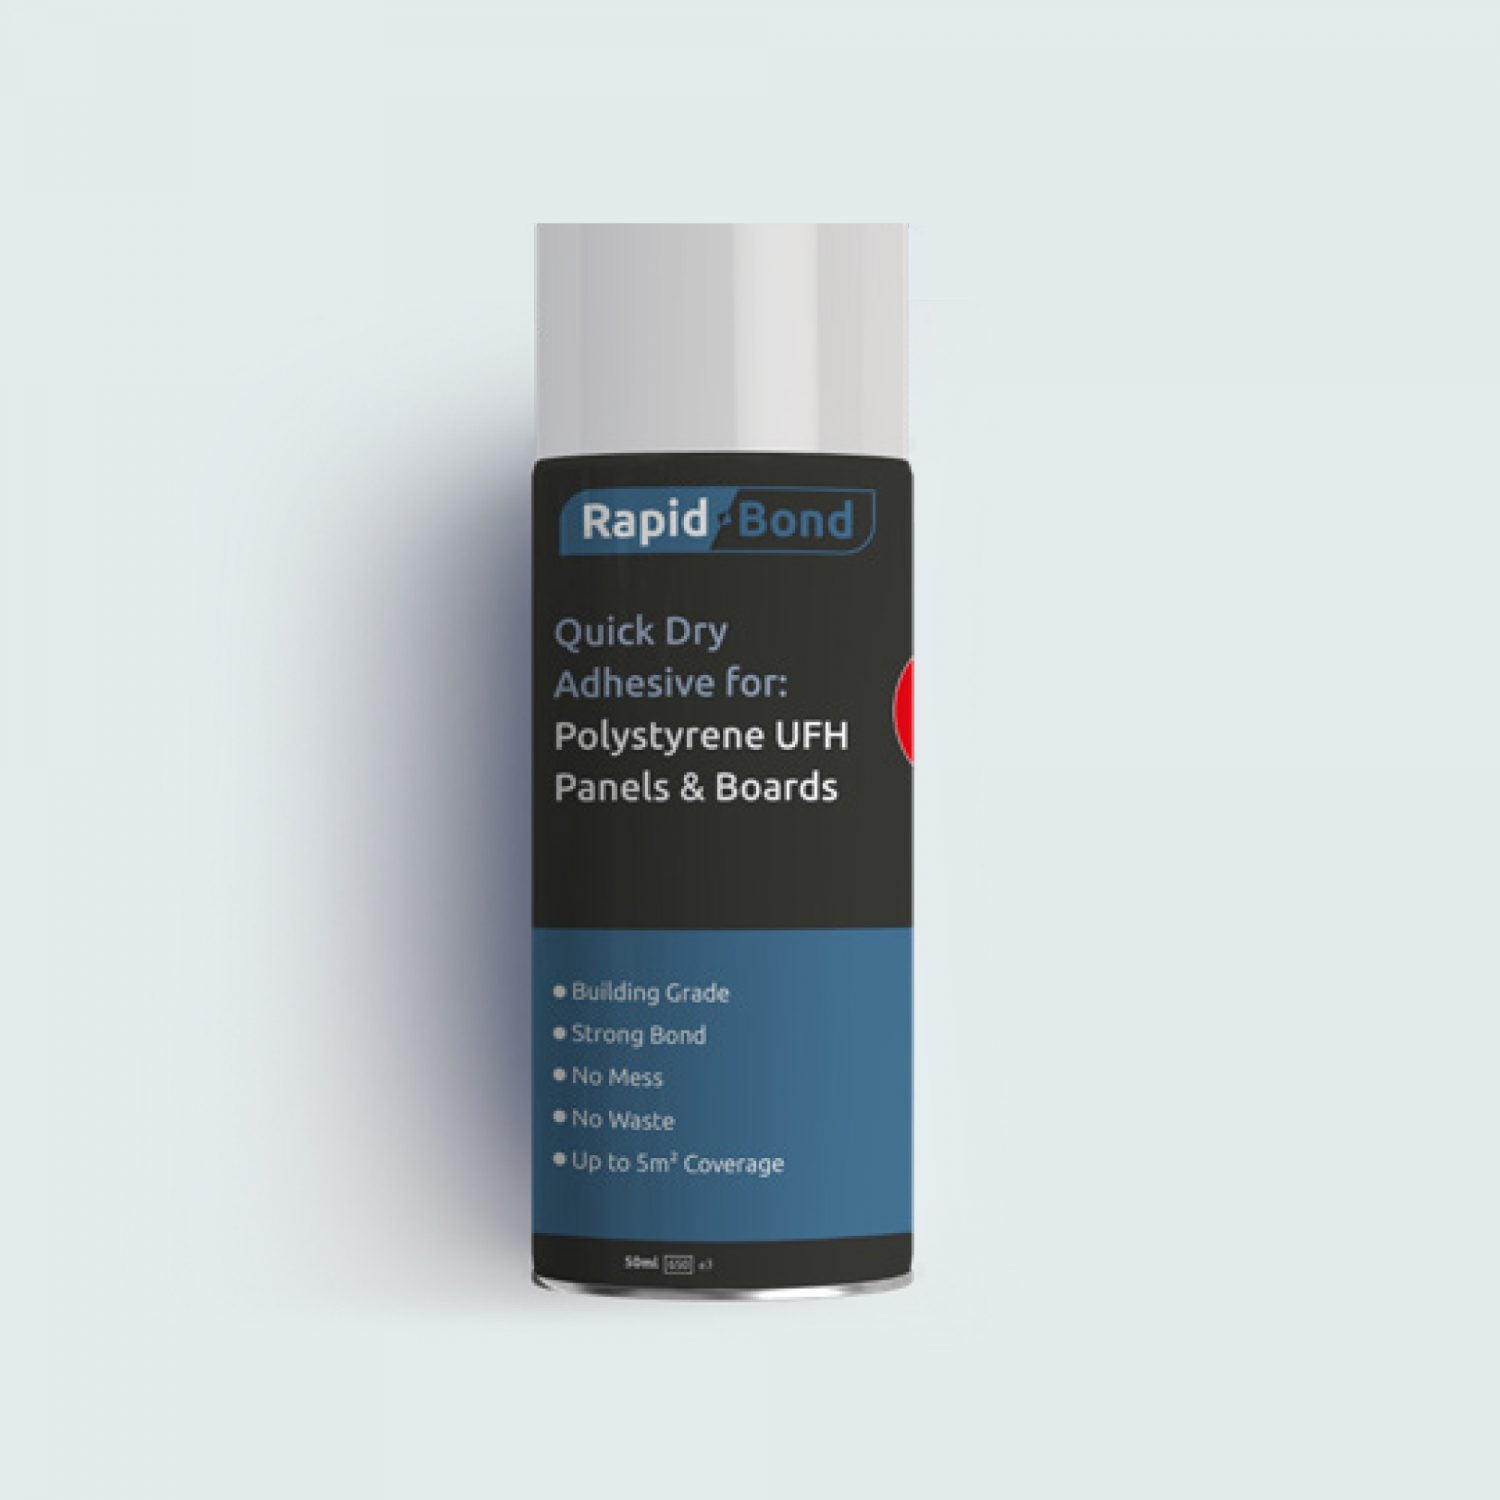 Rapid Bond Spray Glue – Quick Dry Adhesive For: Polystyrene UFH Panels and Boards - UFH Parts & Design Ltd